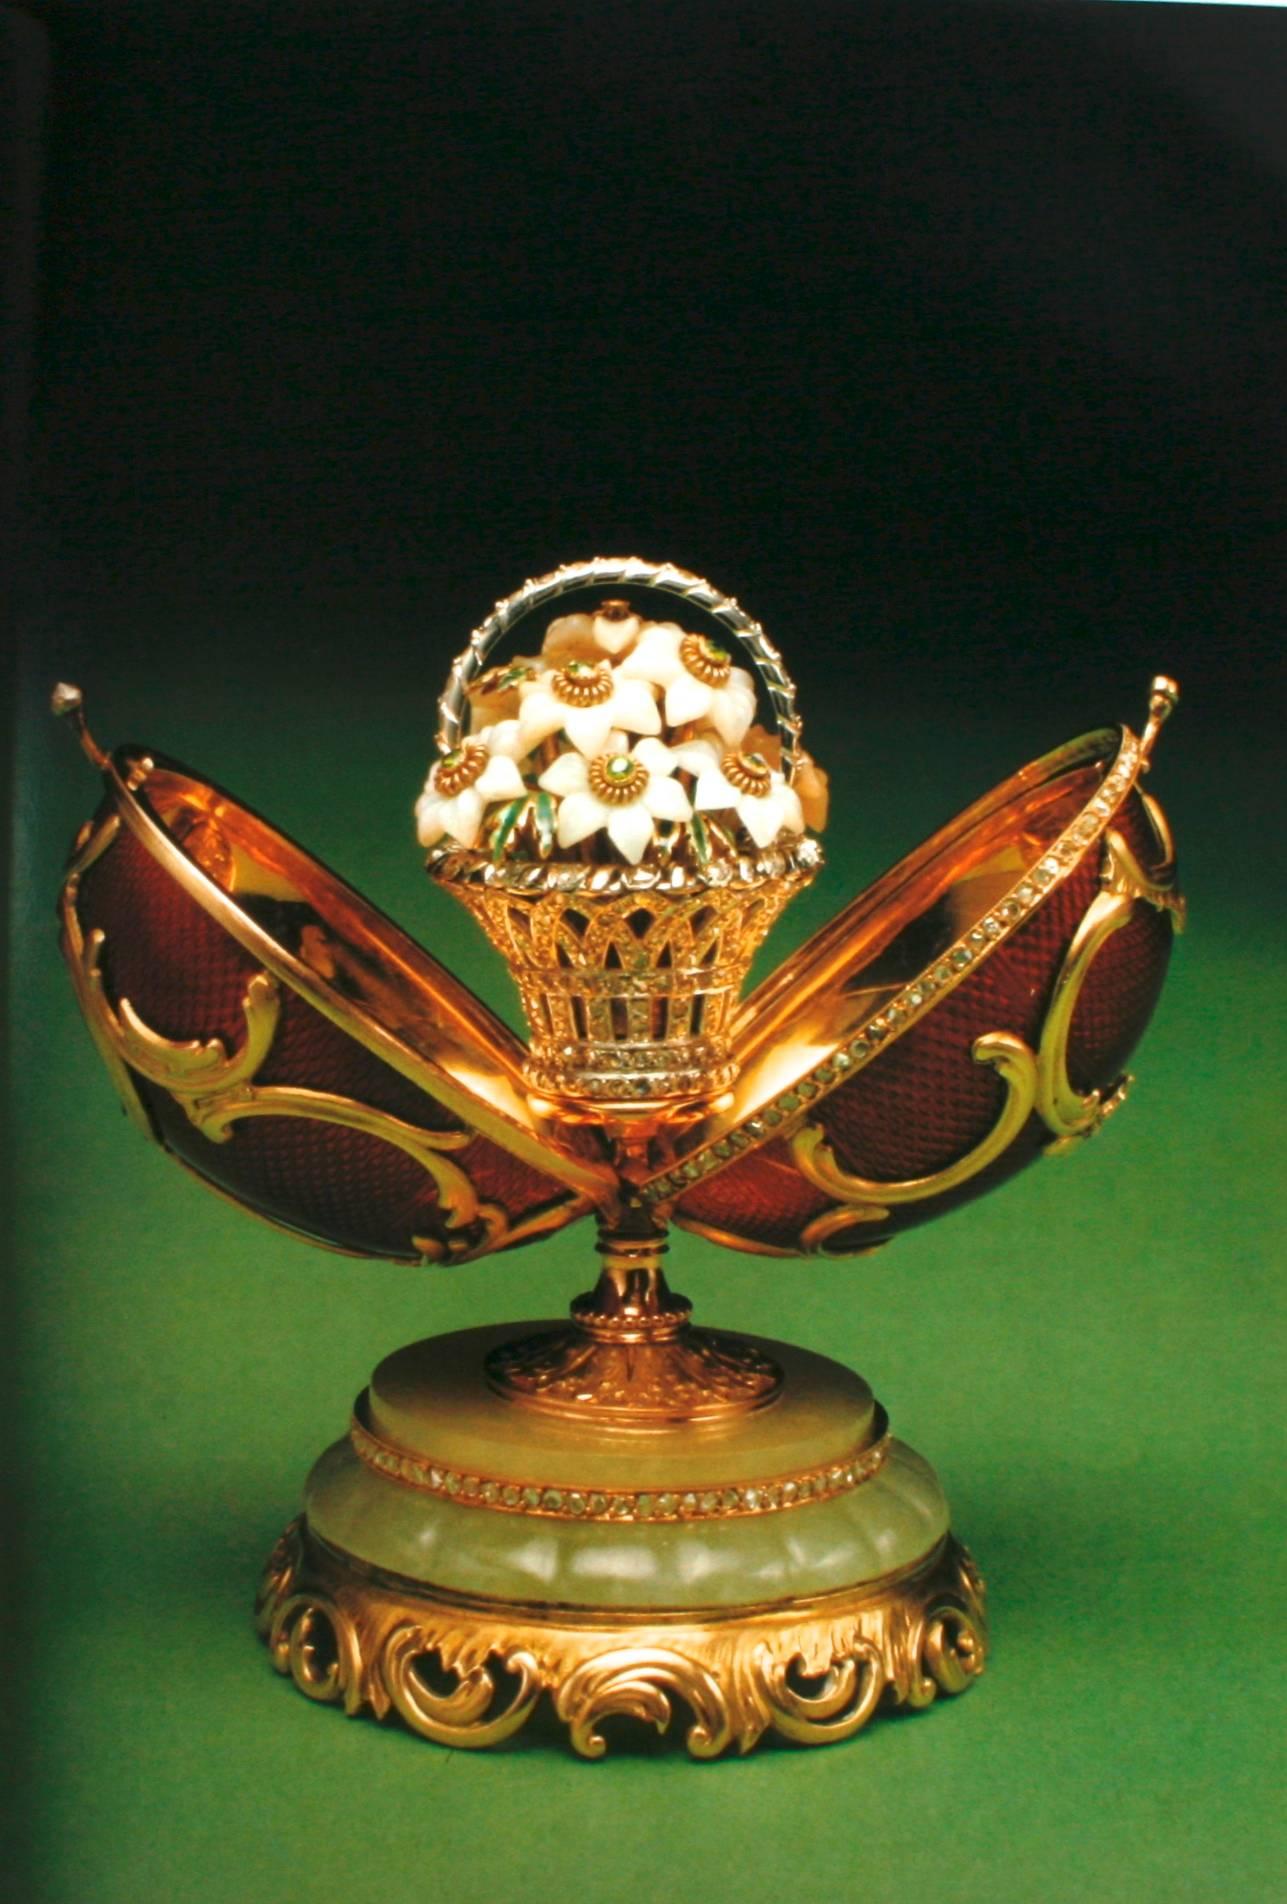 Fabergé Eggs Imperial Russian Fantasies. New York: Harry N. Abrams, Inc., 1980. First edition second printing soft cover. An oversized coffee table book on Fabergé eggs. In Imperial Russia, where Easter is the most important holiday, decorated eggs